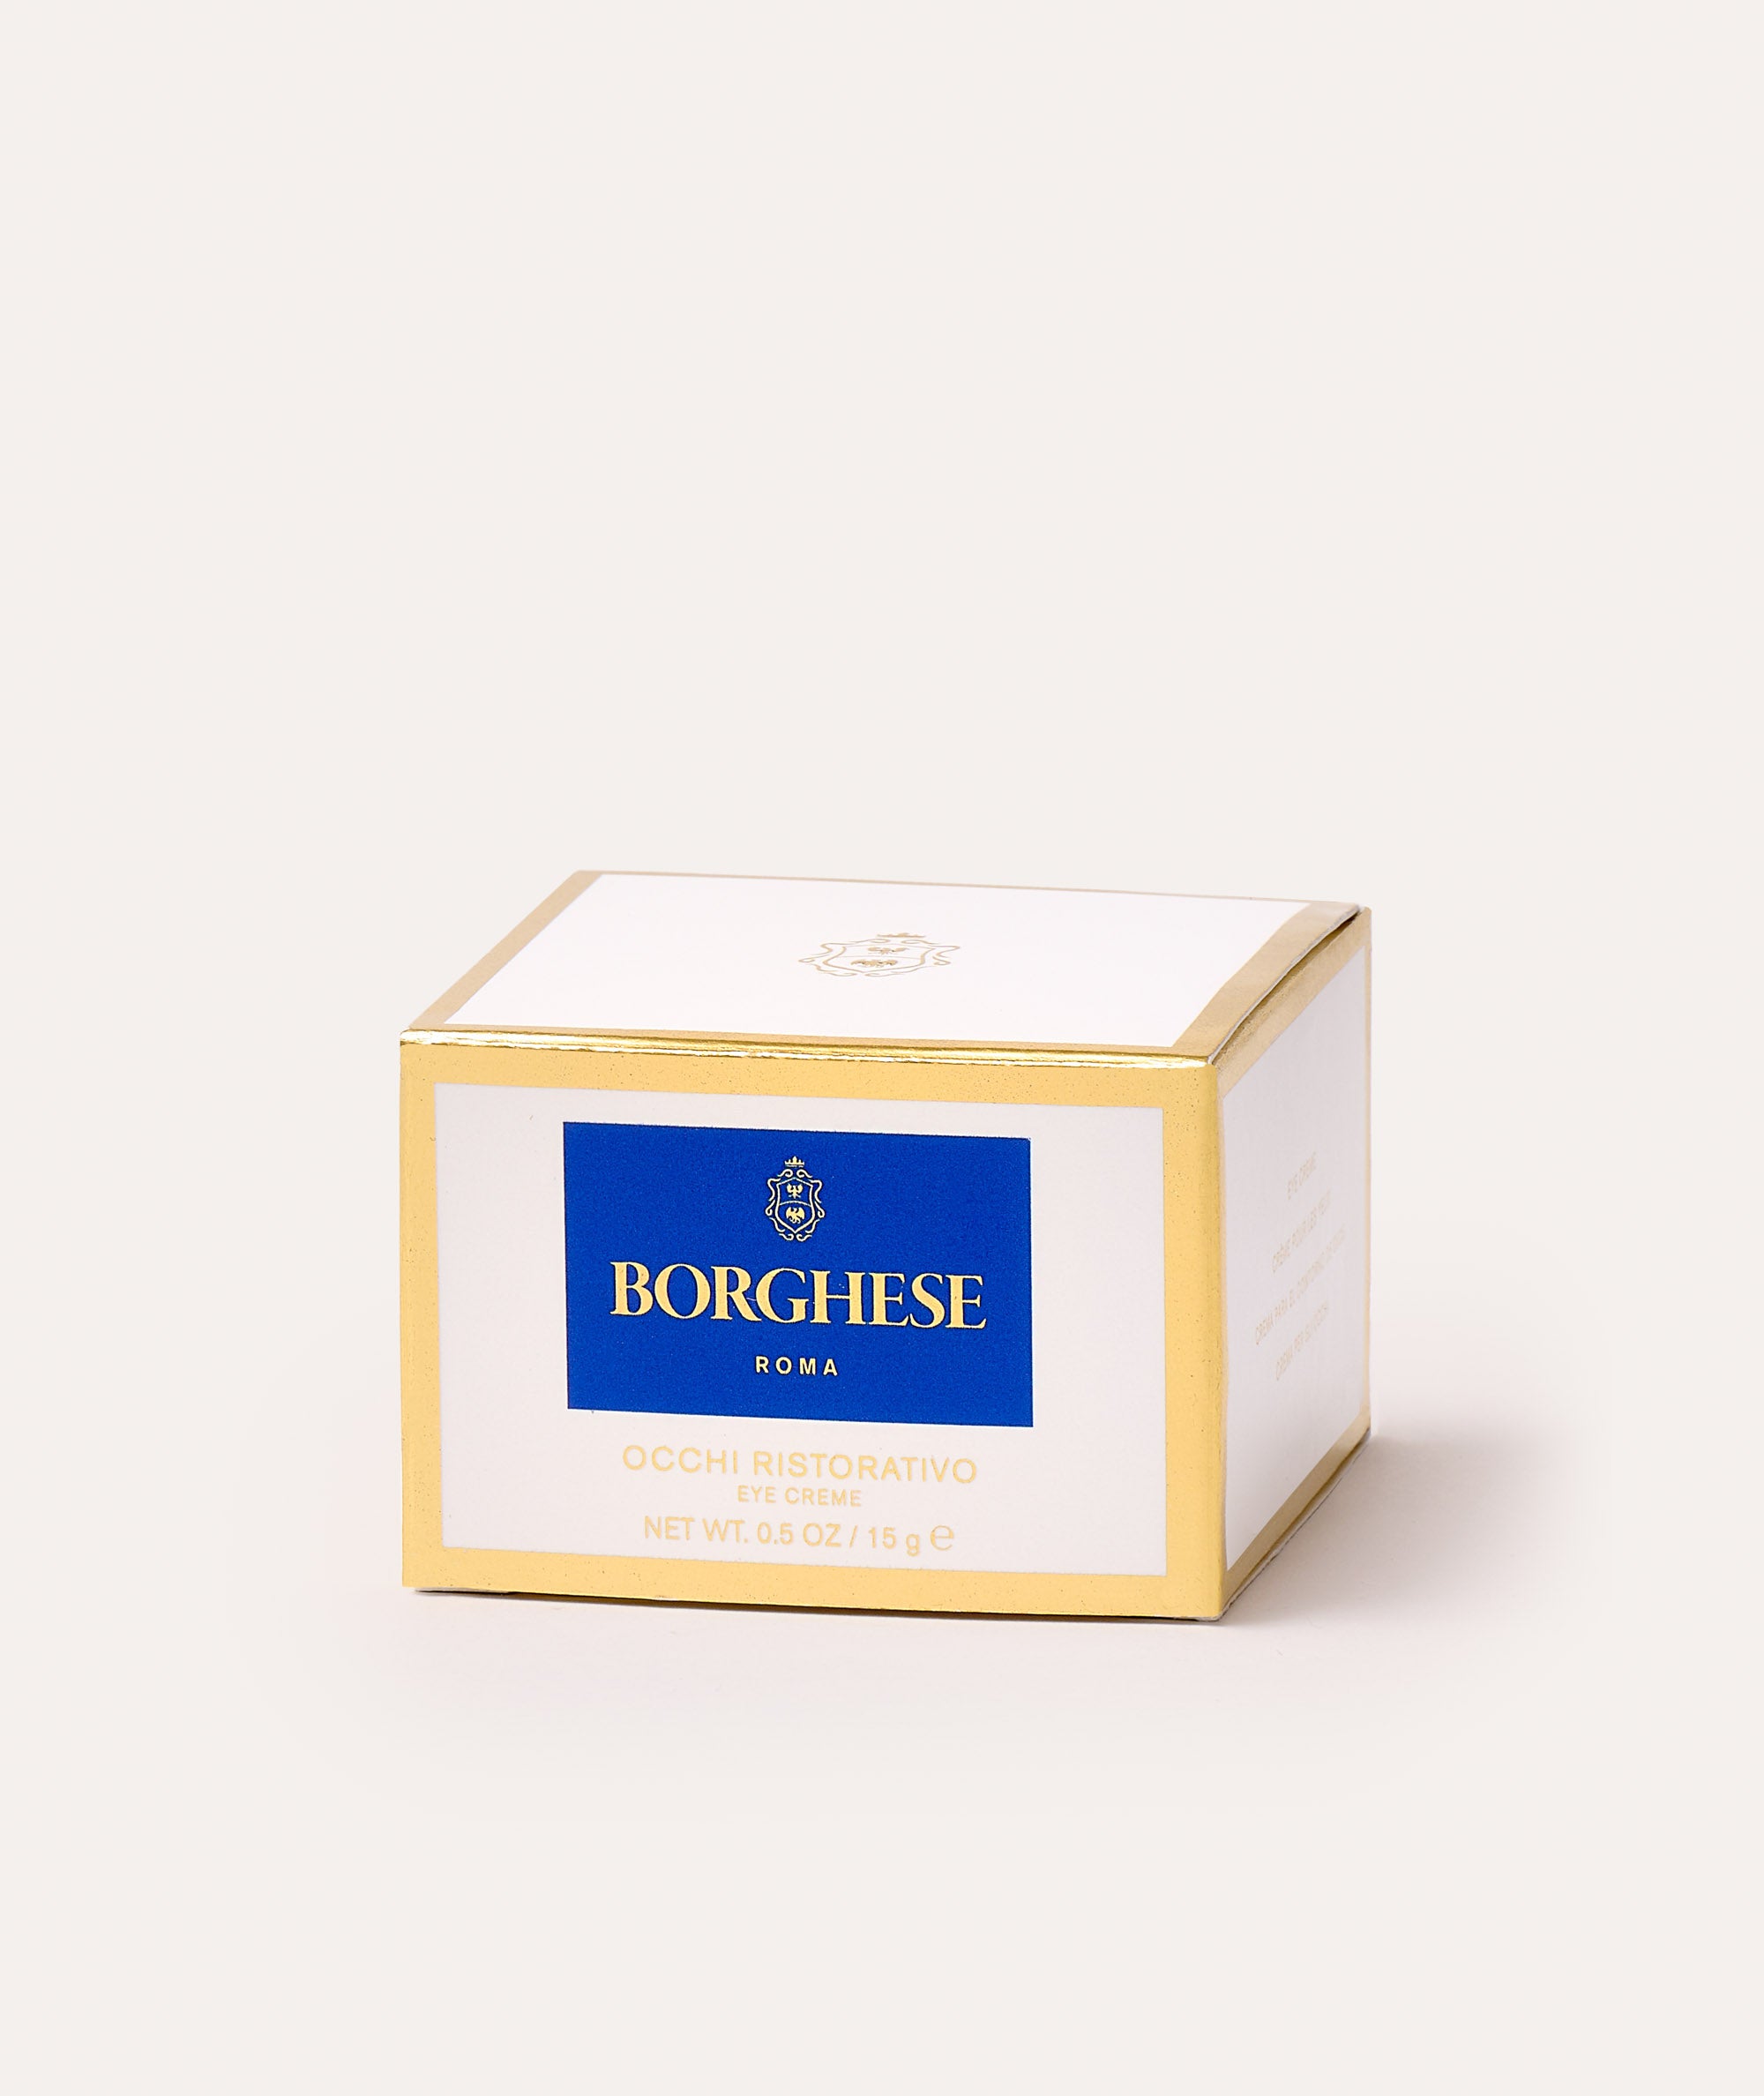 This is a picture of the Borghese Occhi Ristorativo Eye Creme in a white box